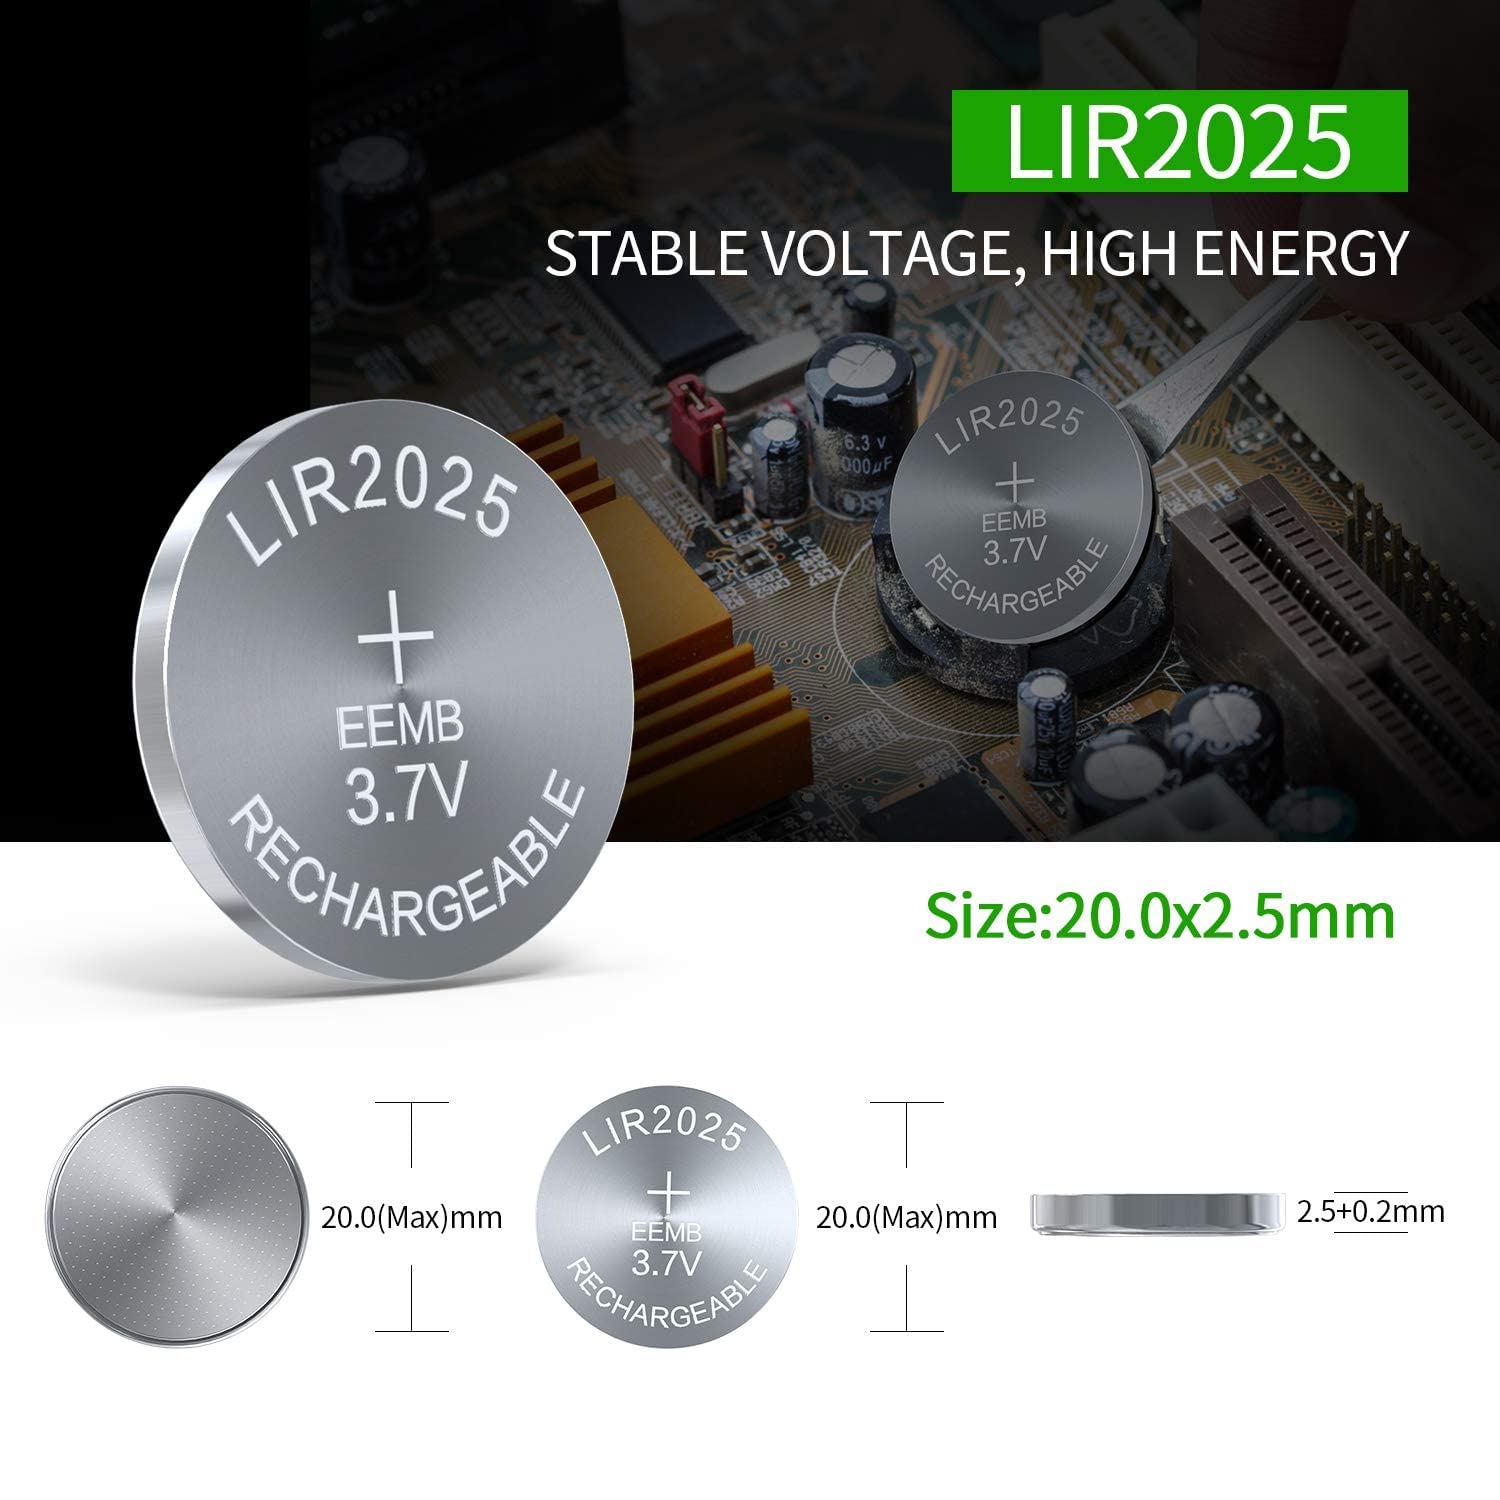 10PCS EEMB LIR2025 Rechargeable Battery 3.7V Lithium-ion Coin Button Cell Batteries 40mAh